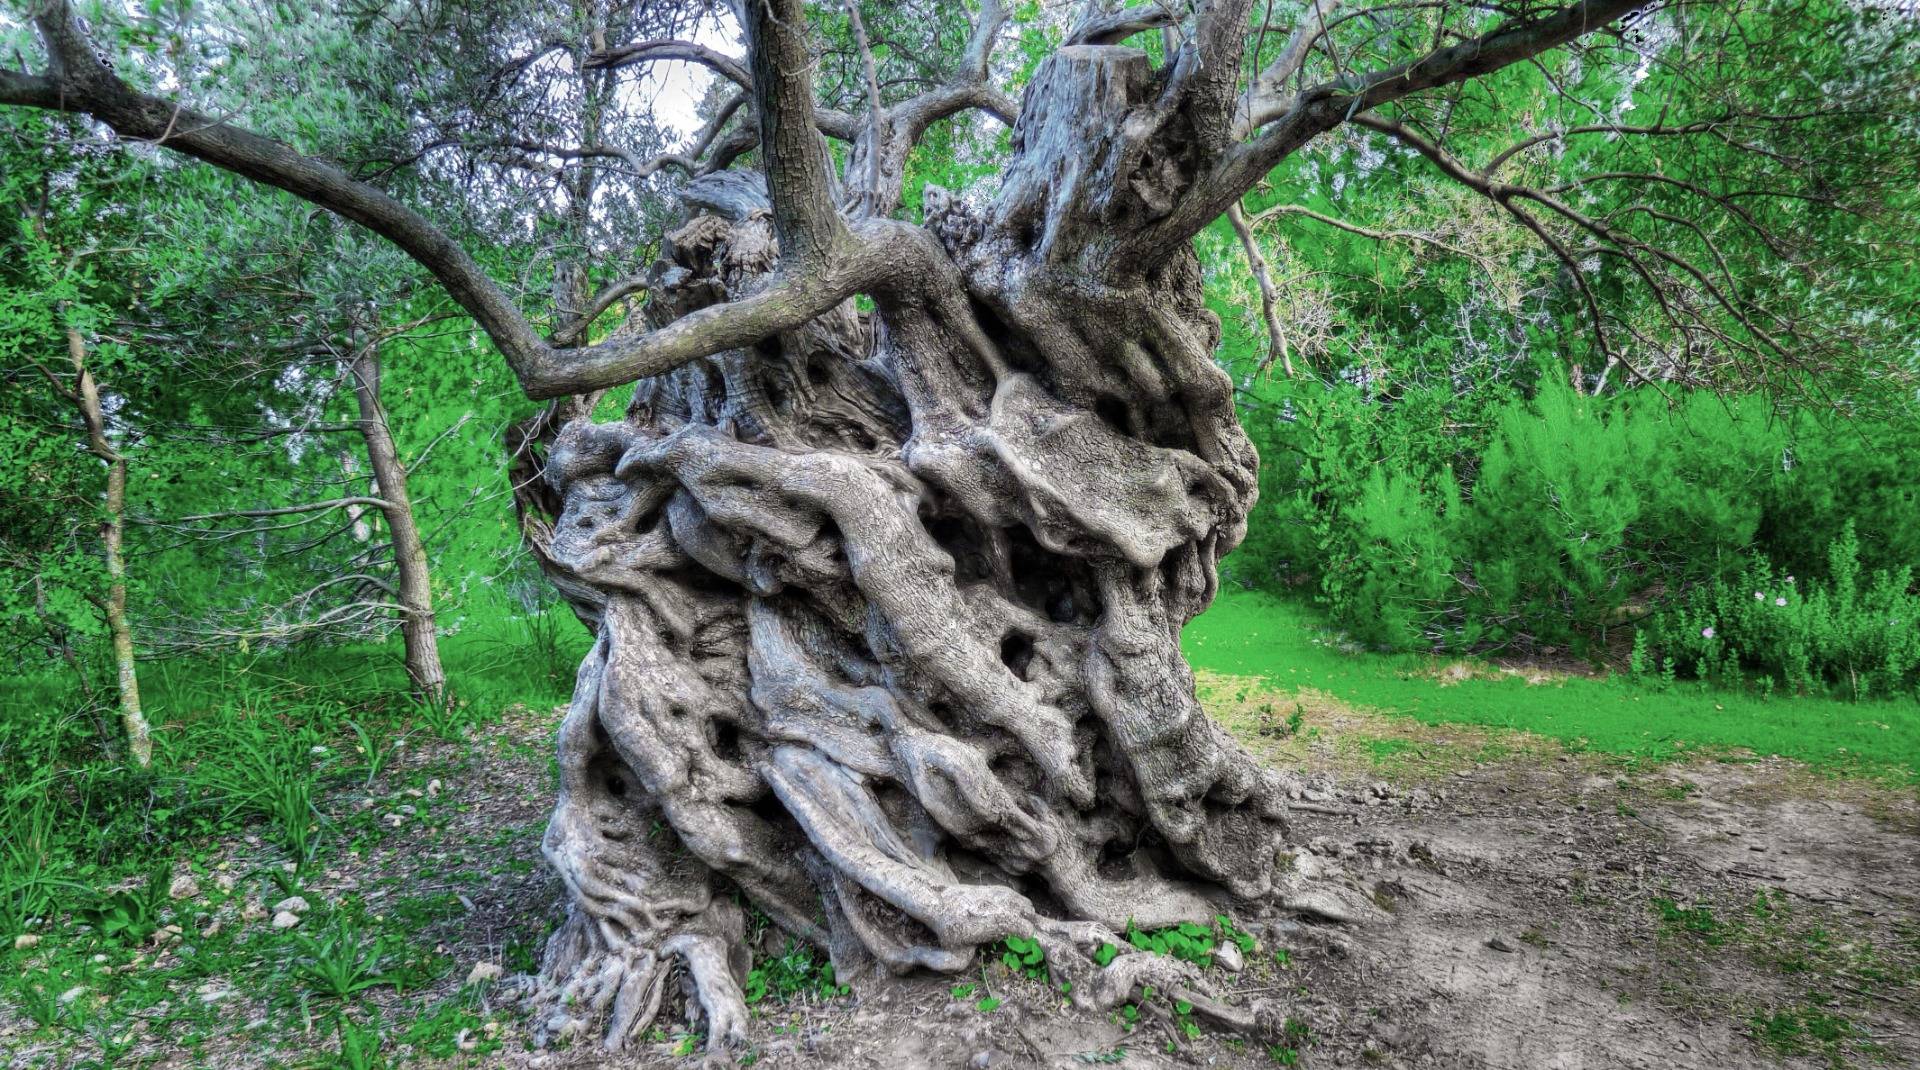 An olive tree, thousand years old